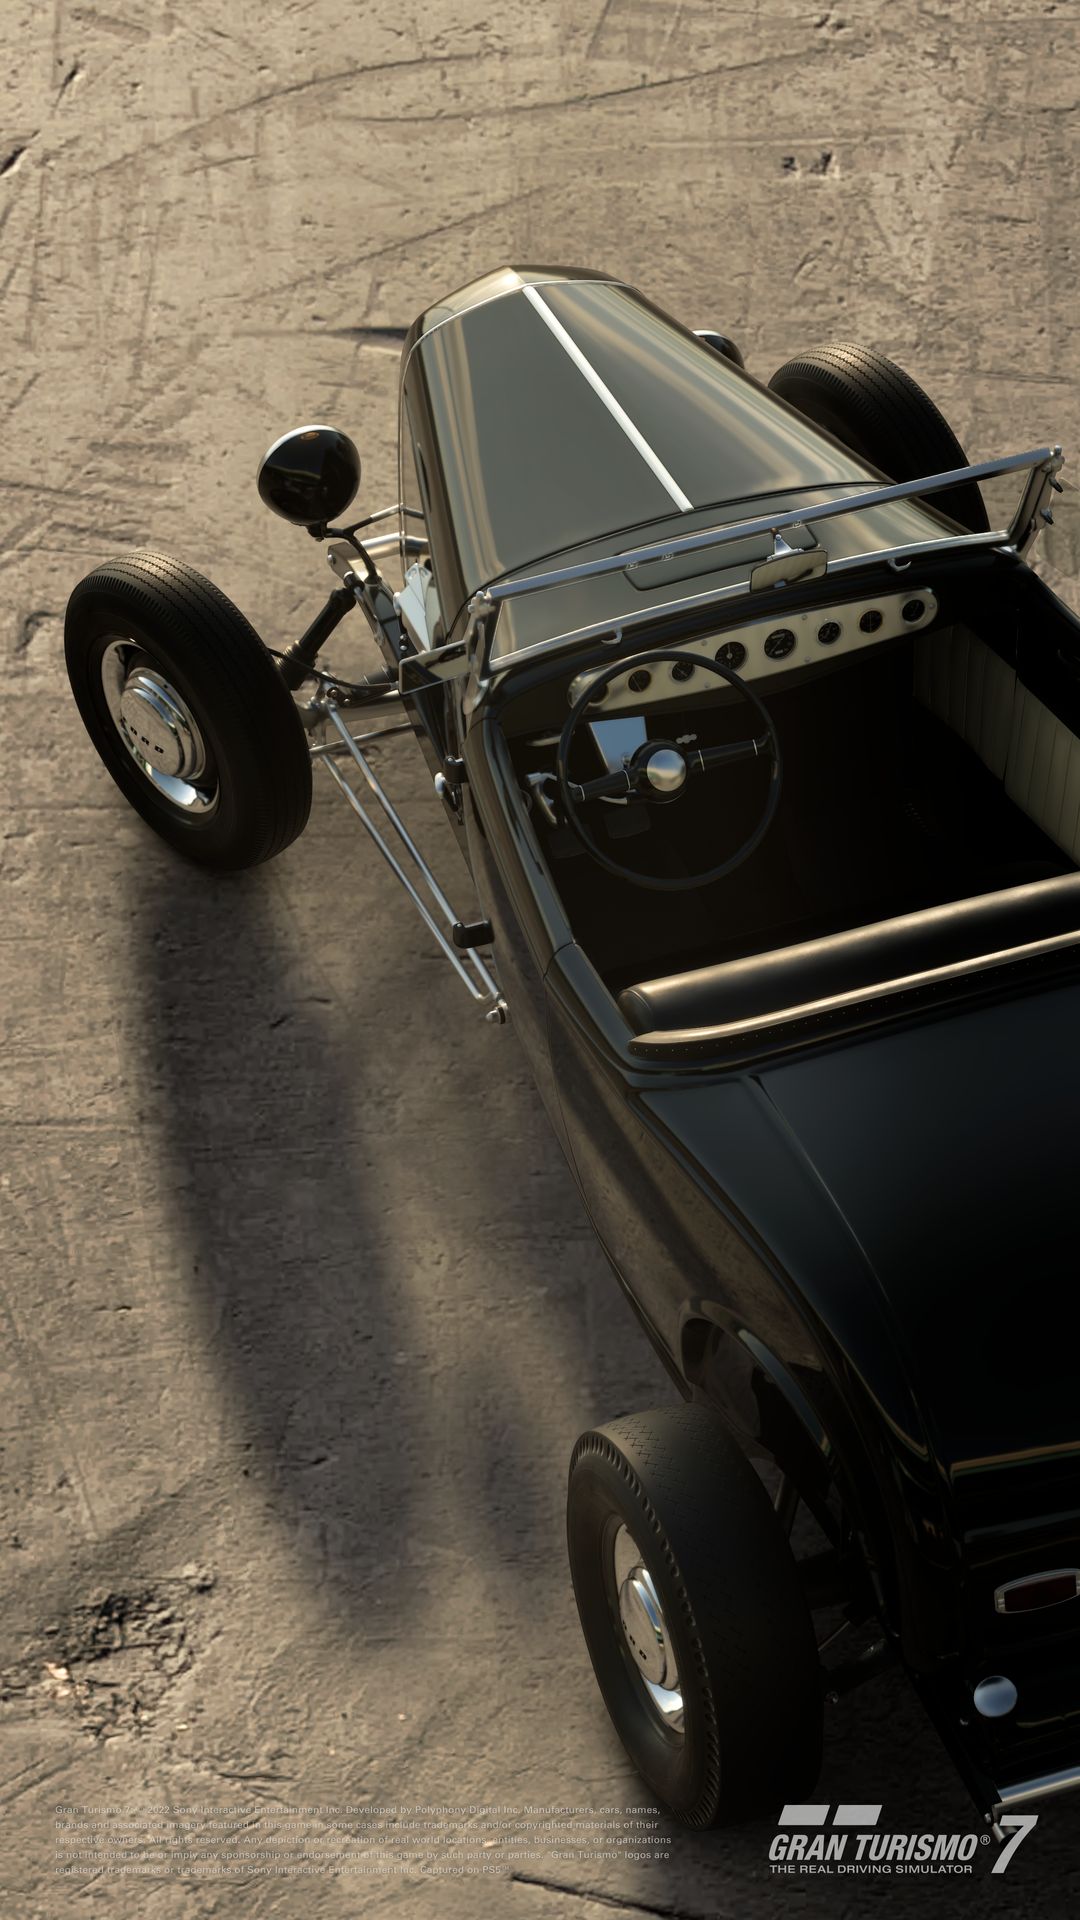 Gran Turismo 7's new free update includes the Ford Model Roadster